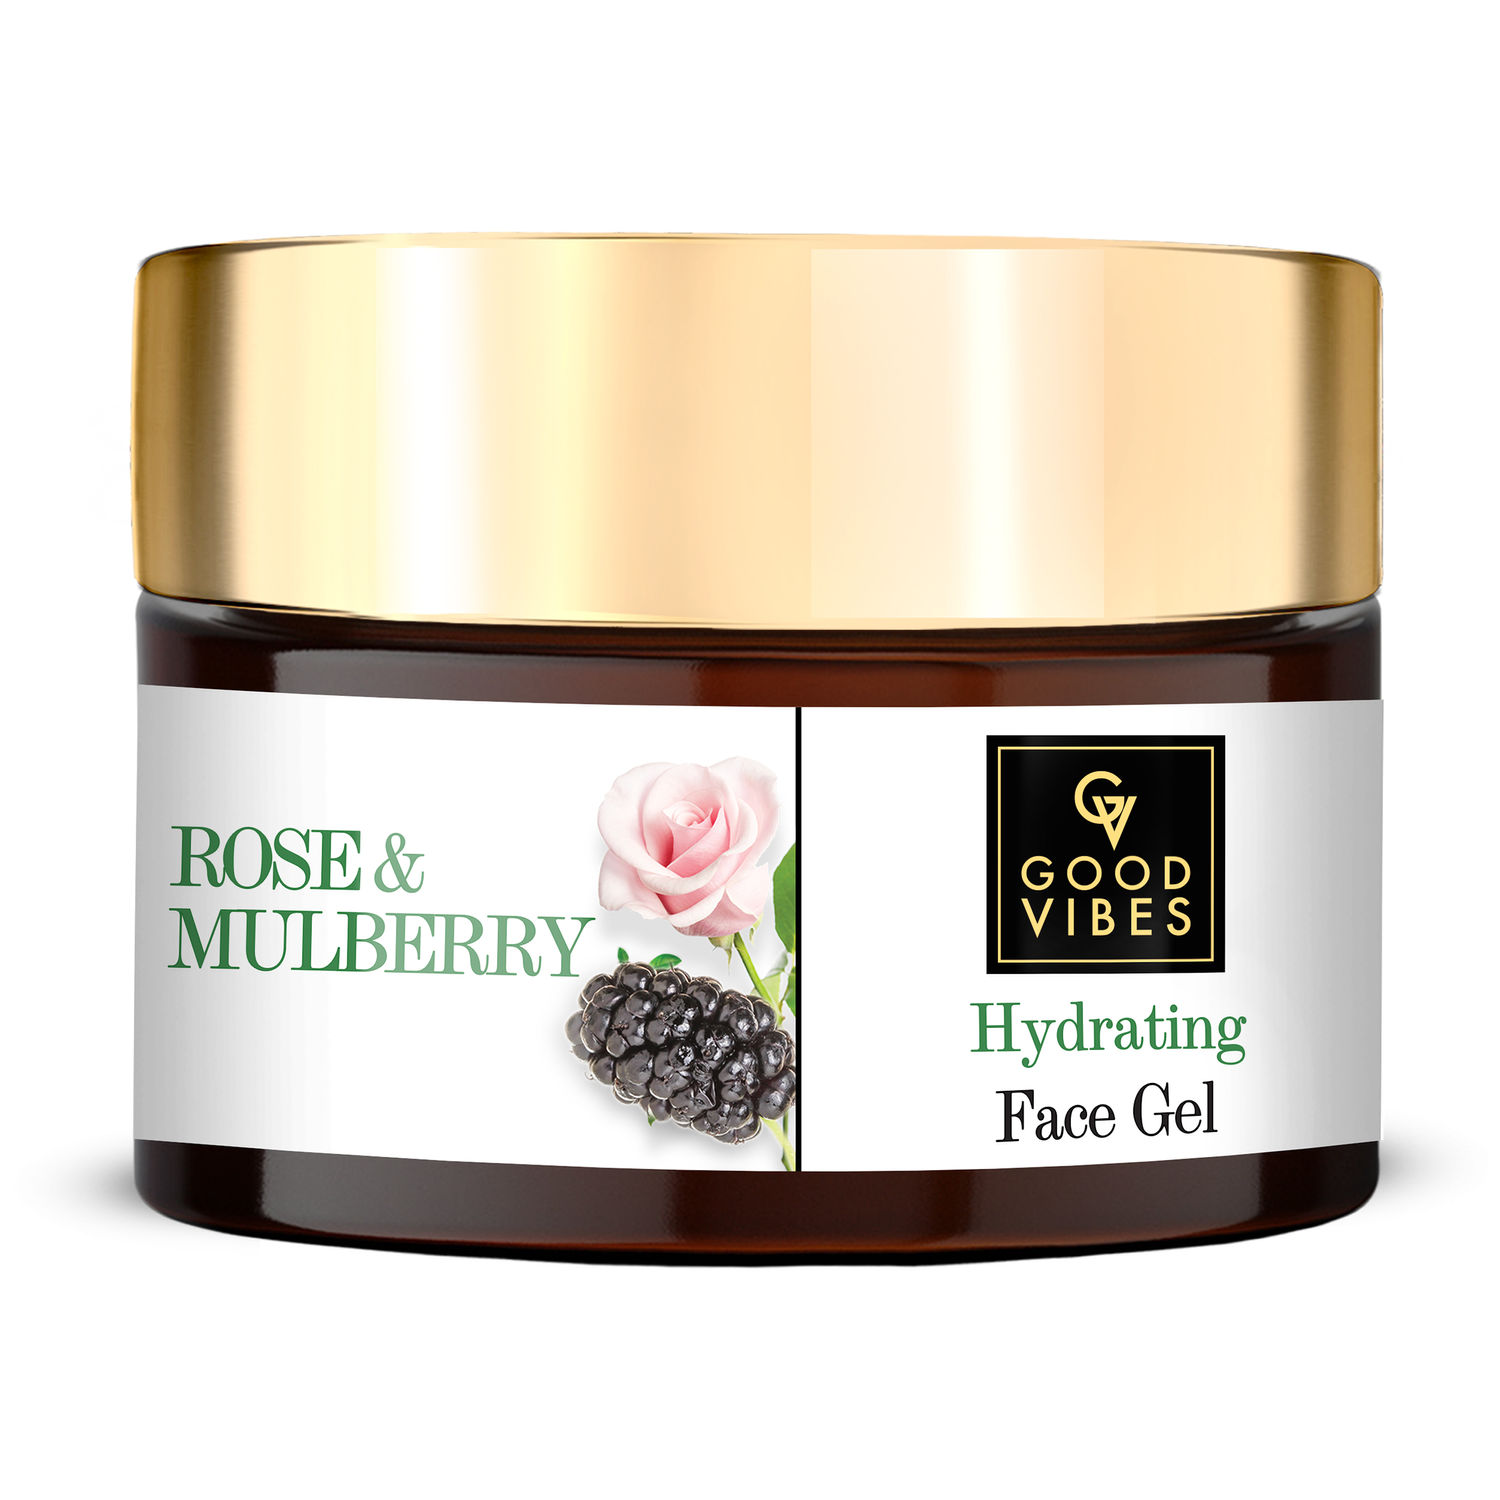 Good Vibes Rose & Mulberry Hydrating Face Gel |Anti-Ageing, Skin Glowing, Lightening | No Parabens, No Sulphates, No Mineral Oil (50 g)